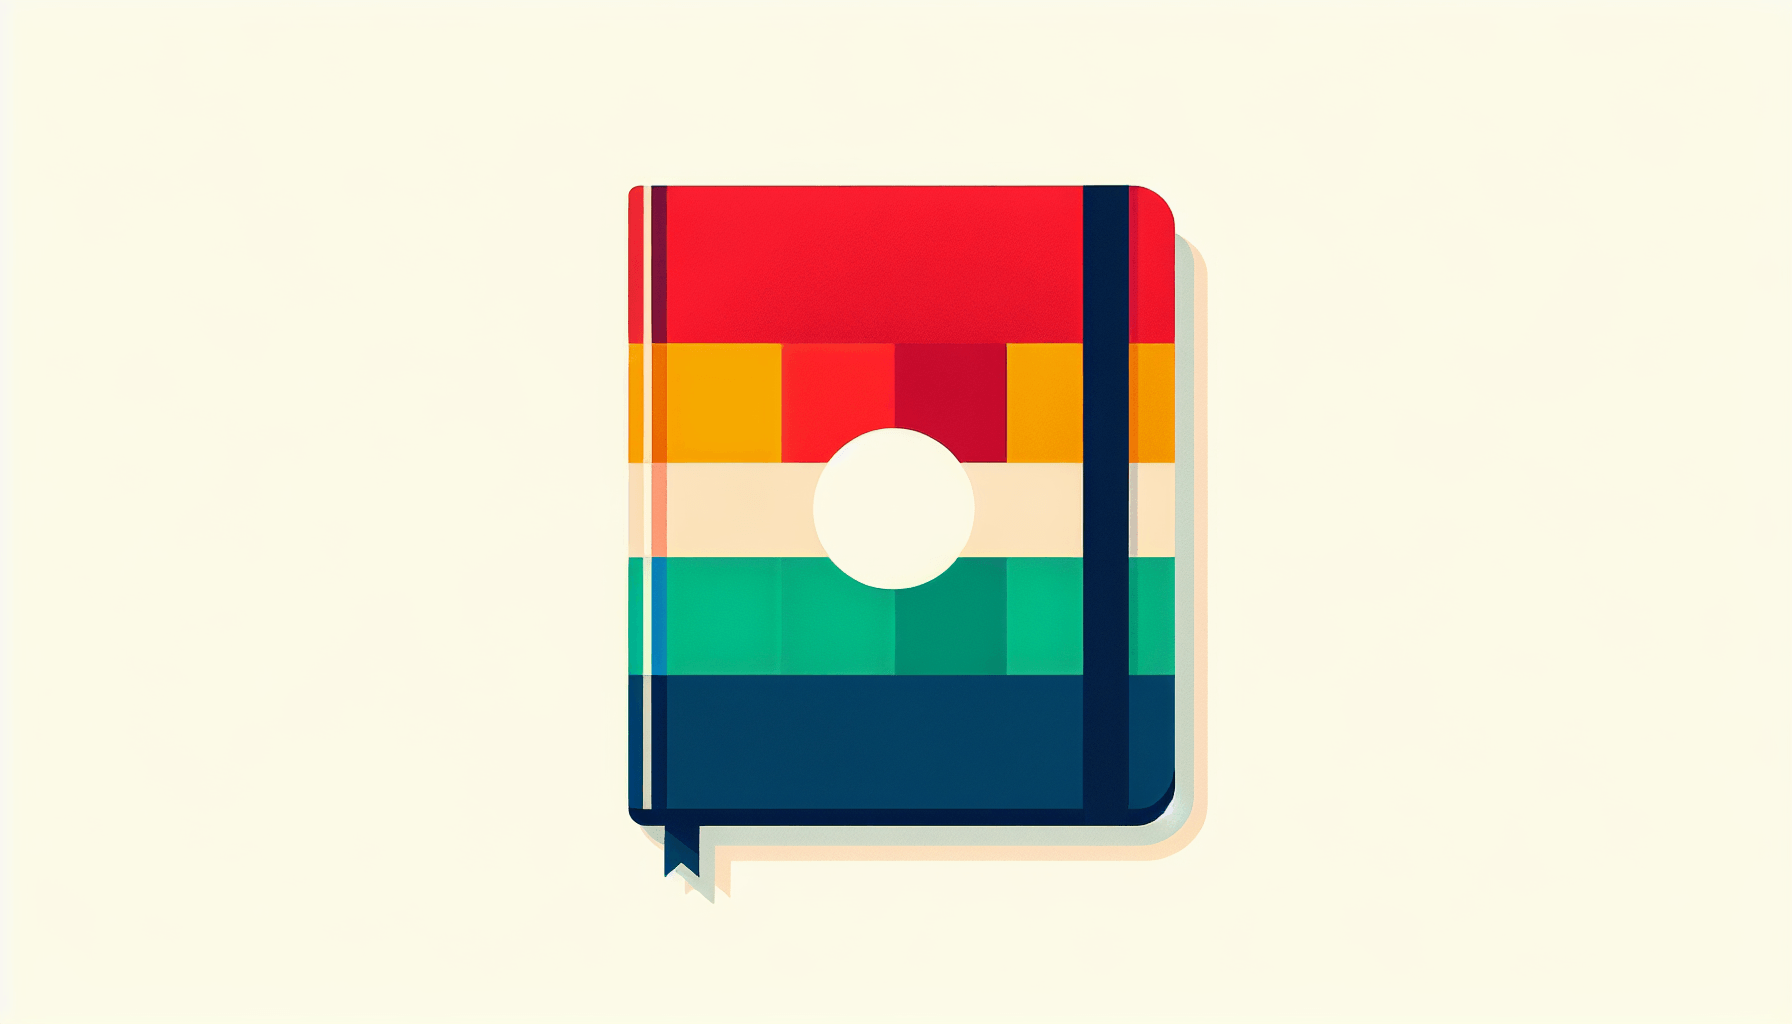 Notebook in flat illustration style and white background, red #f47574, green #88c7a8, yellow #fcc44b, and blue #645bc8 colors.